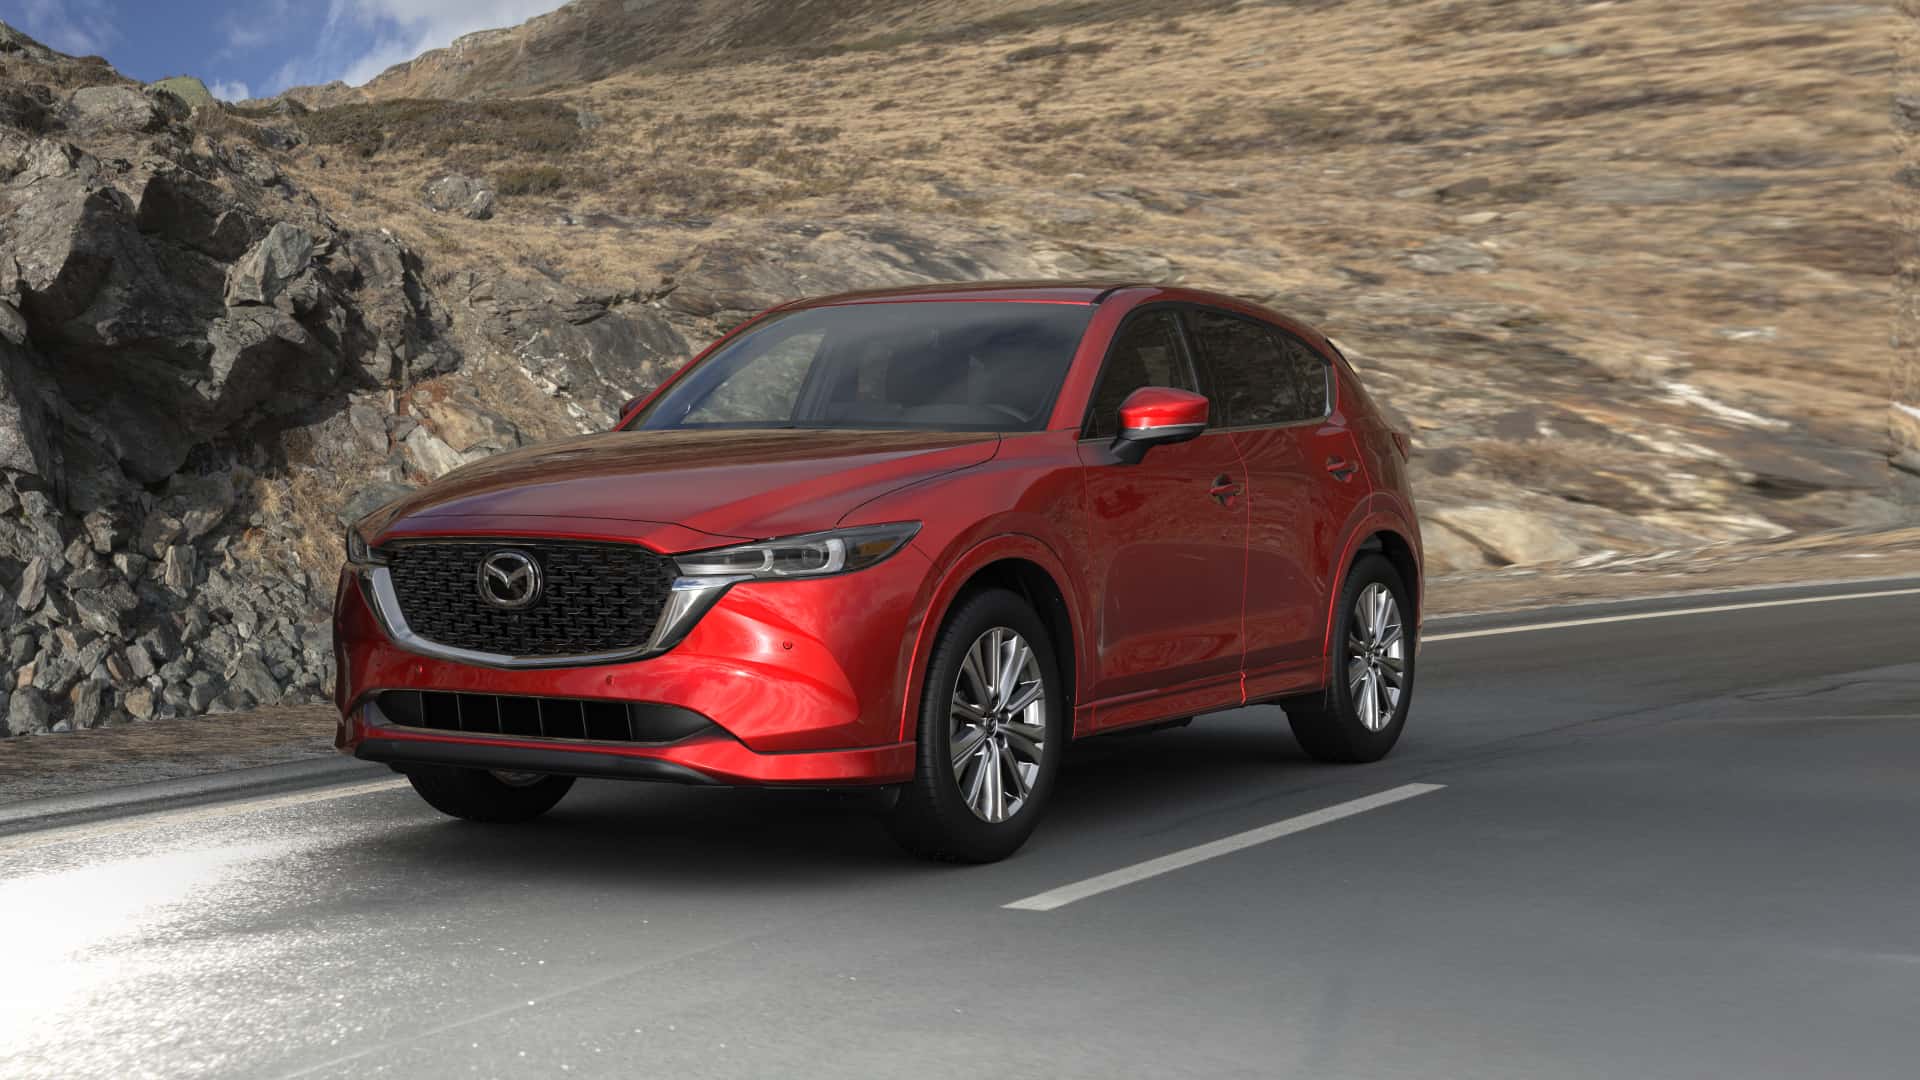 2023 Mazda CX-5 2.5 Turbo Signature Soul Red Crystal Metallic | Bommarito Mazda St. Peters in St. Peters MO